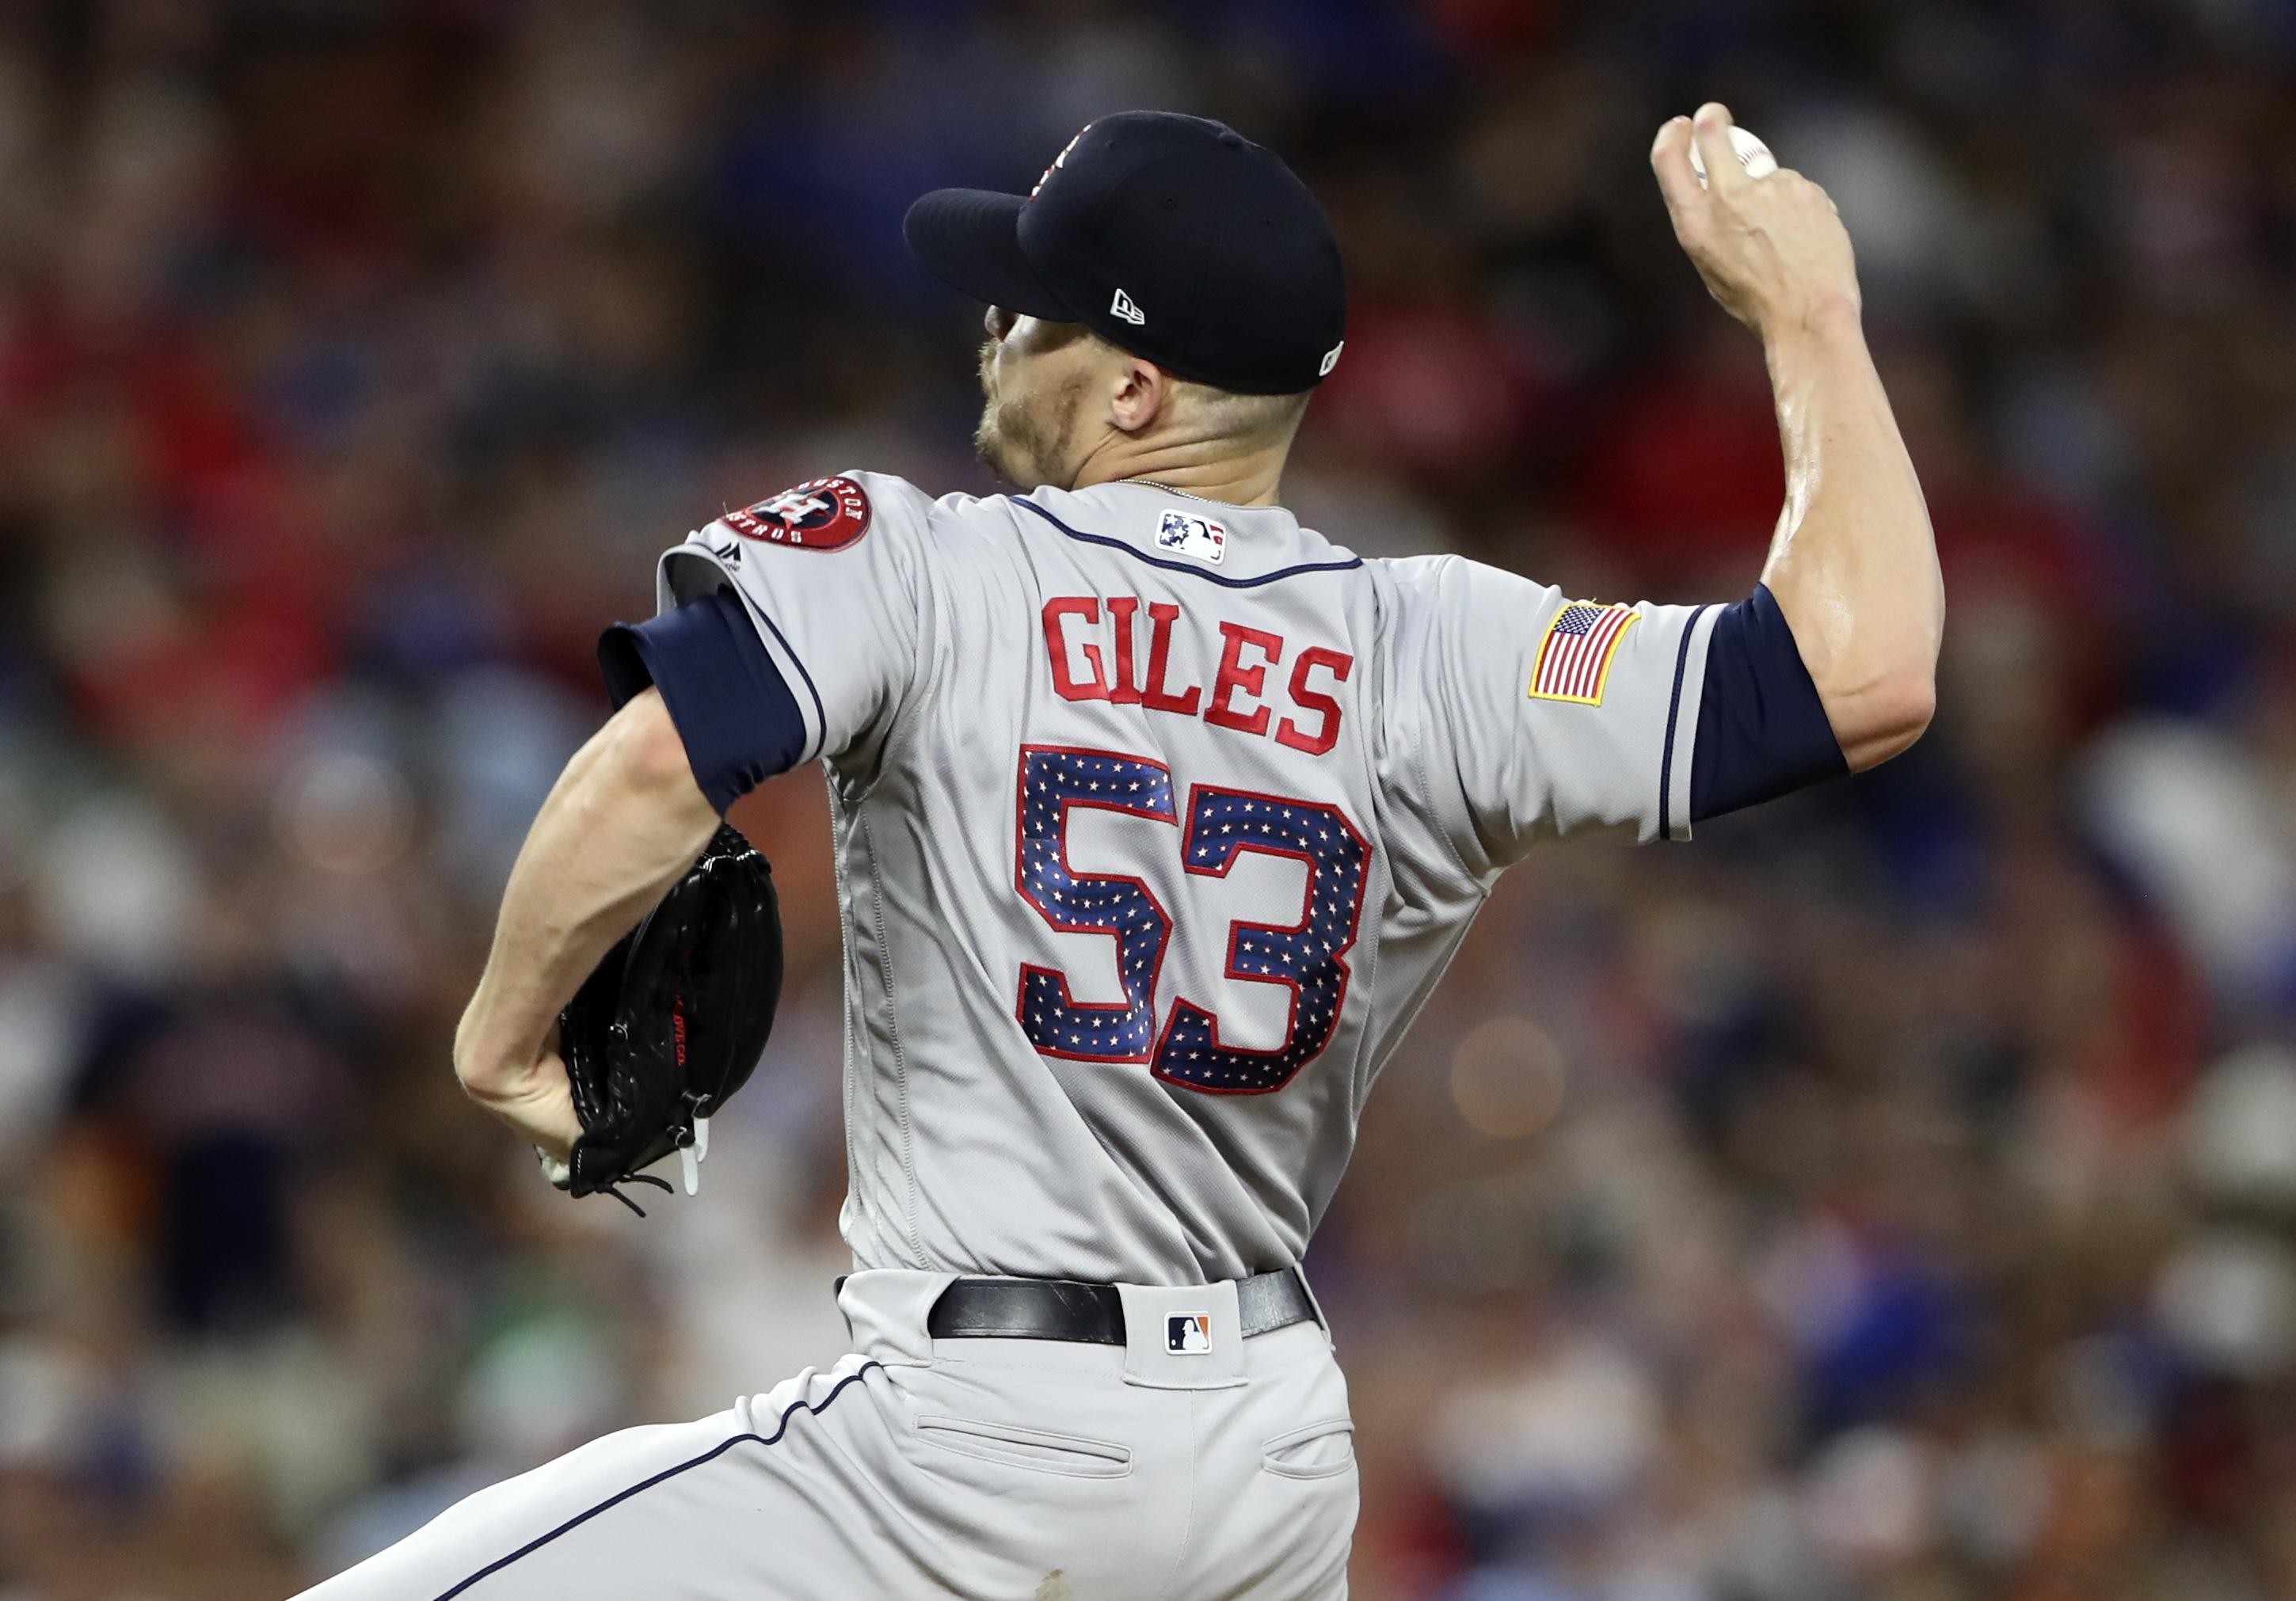 What Can We Learn From The Ken Giles Trade?